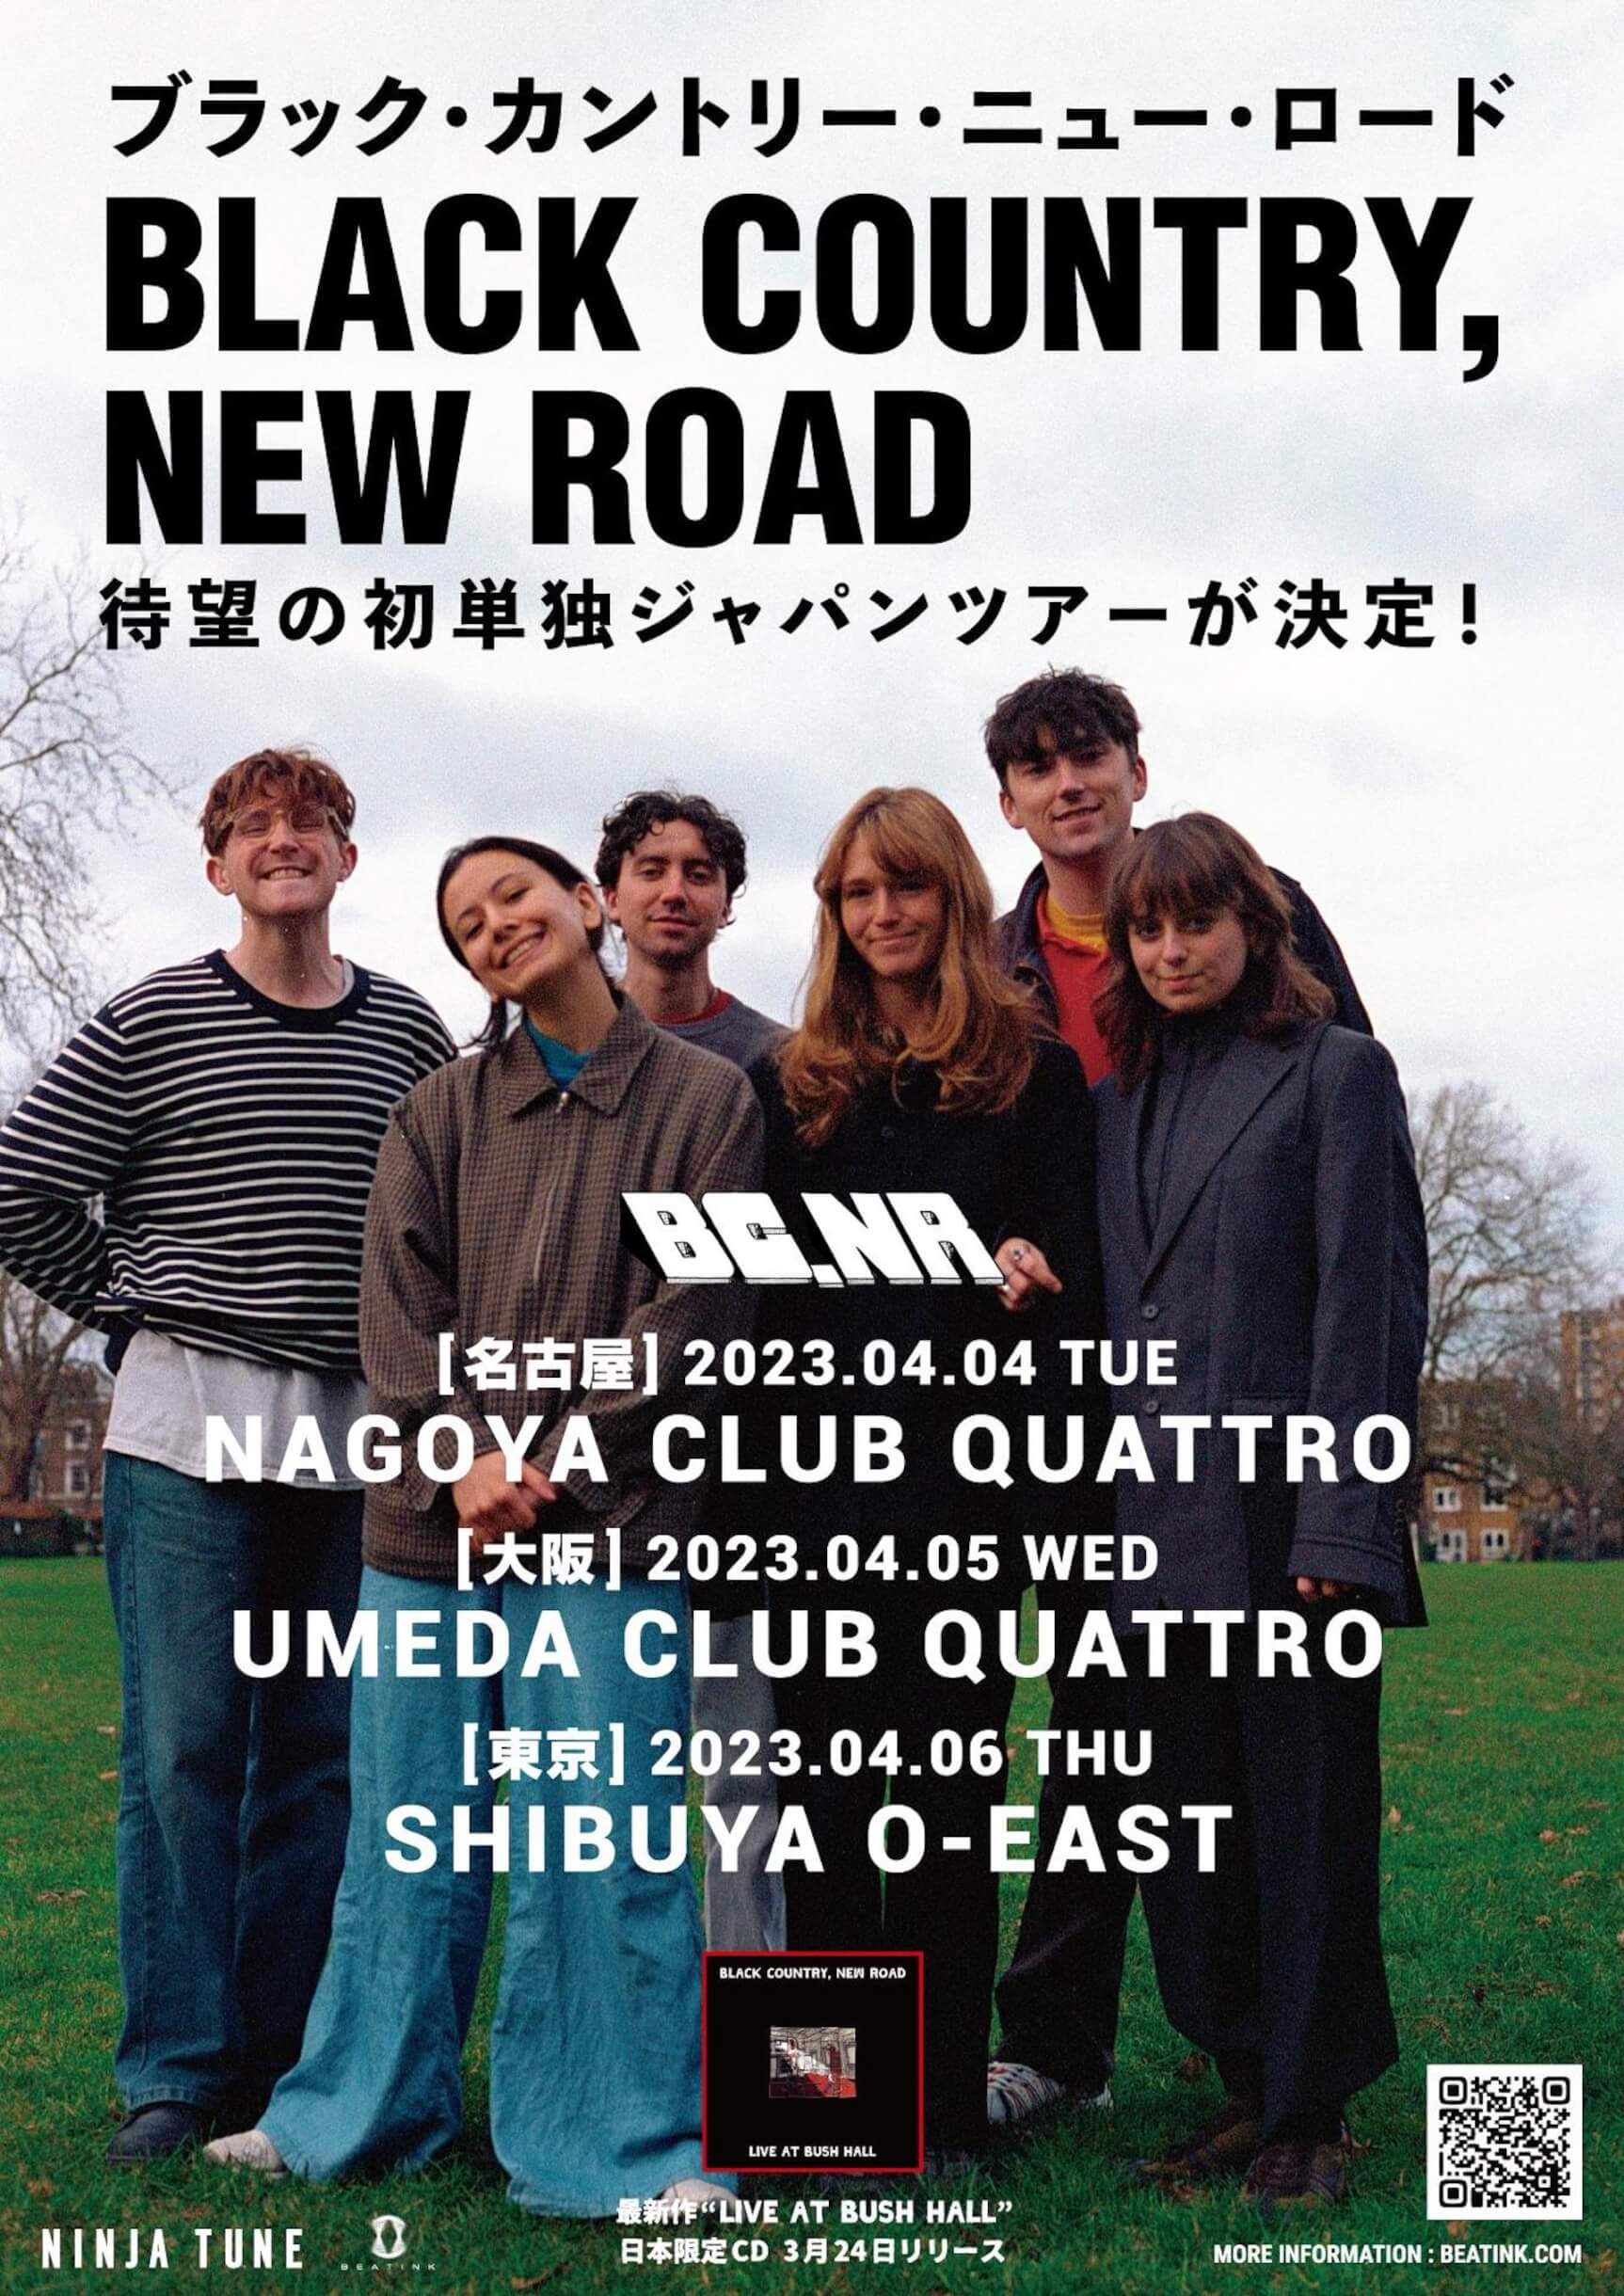 BEATINK、名古屋では初となるPOP UP SHOPを開催中！期間中にはBlack Country, New Roadの名古屋公演も music230317-beatink-bcnr1